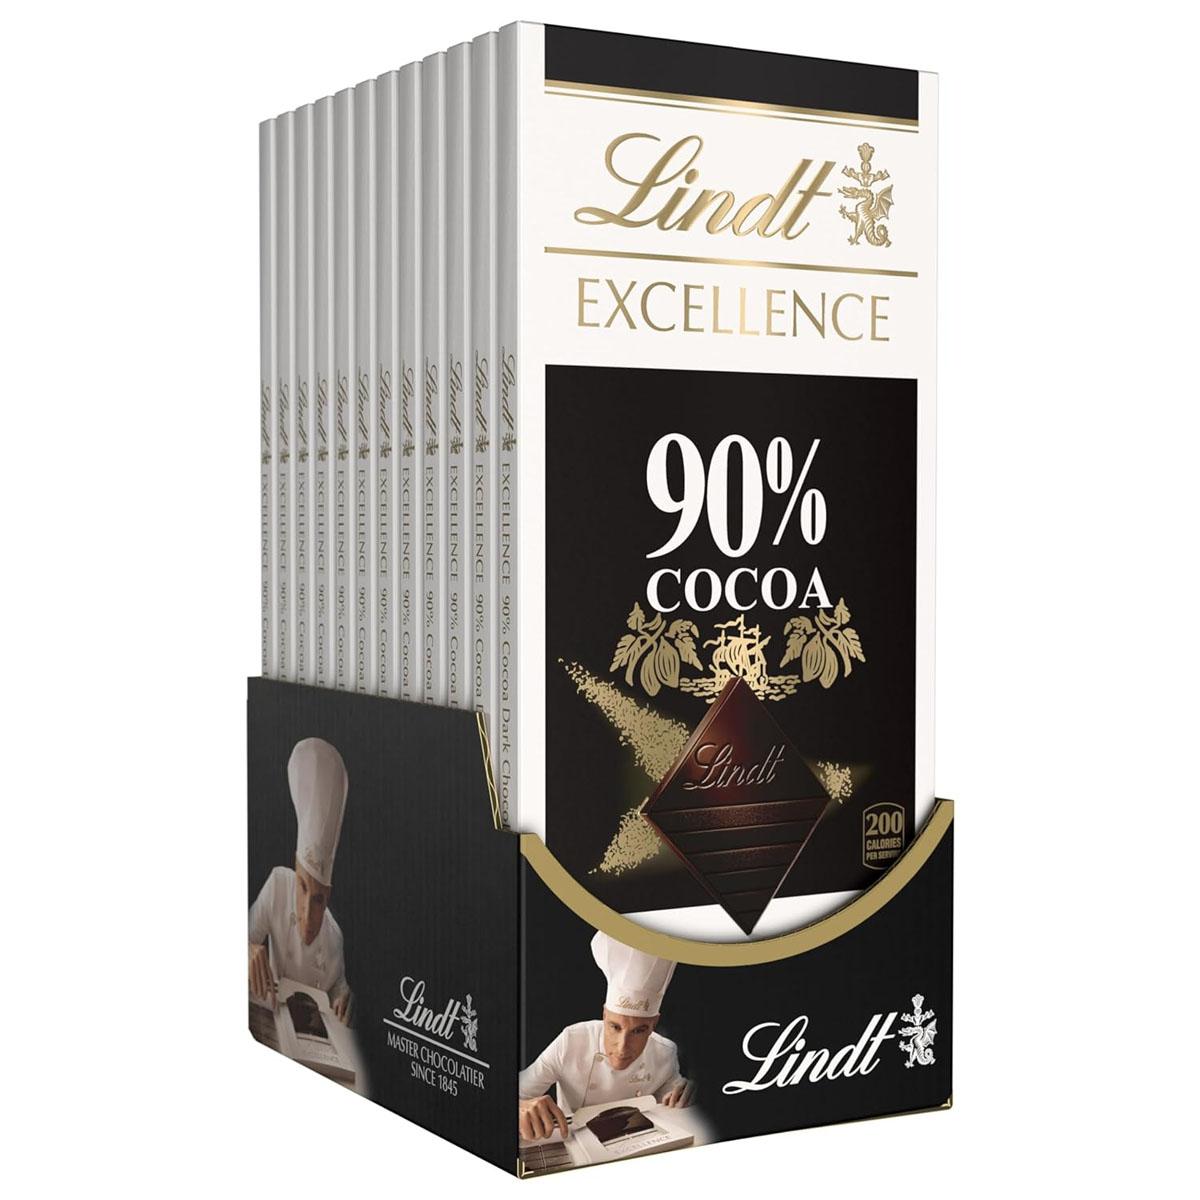 Lindt Excellence Cocoa Dark Chocolate Bar 12 Pack for $24.18